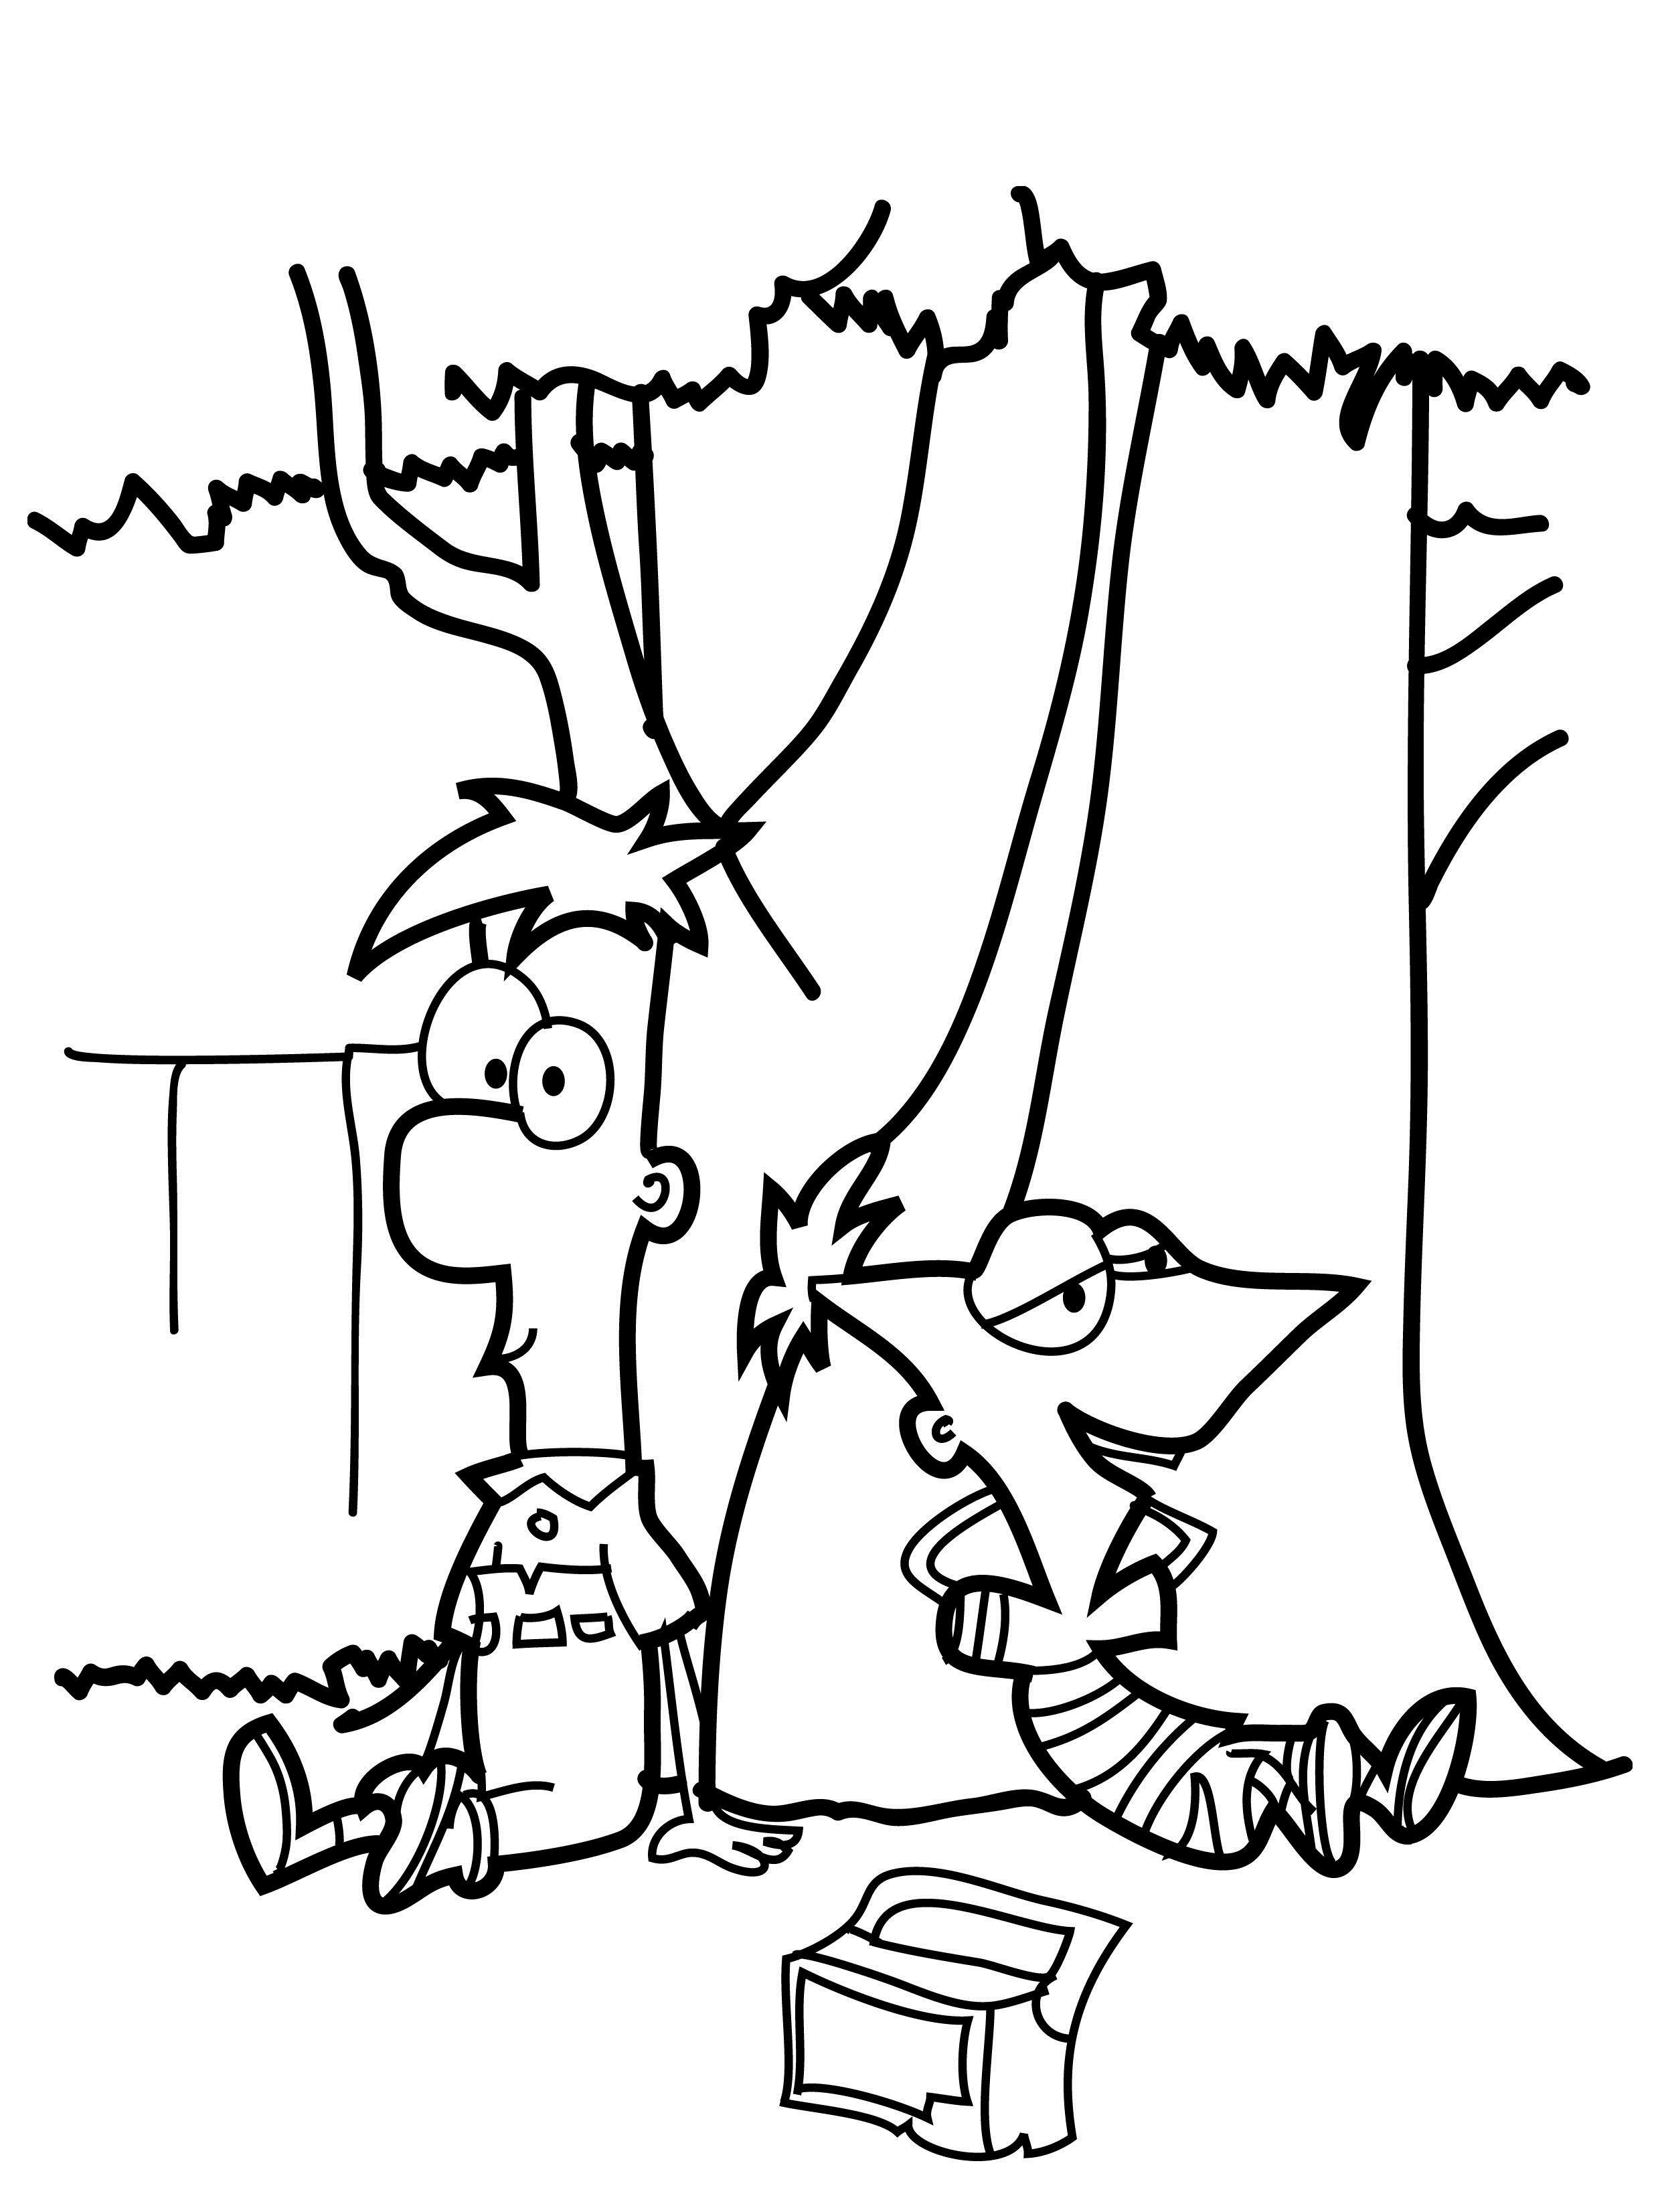 phineas-and-ferb-coloring-sheets-printable-free-printable-phineas-and